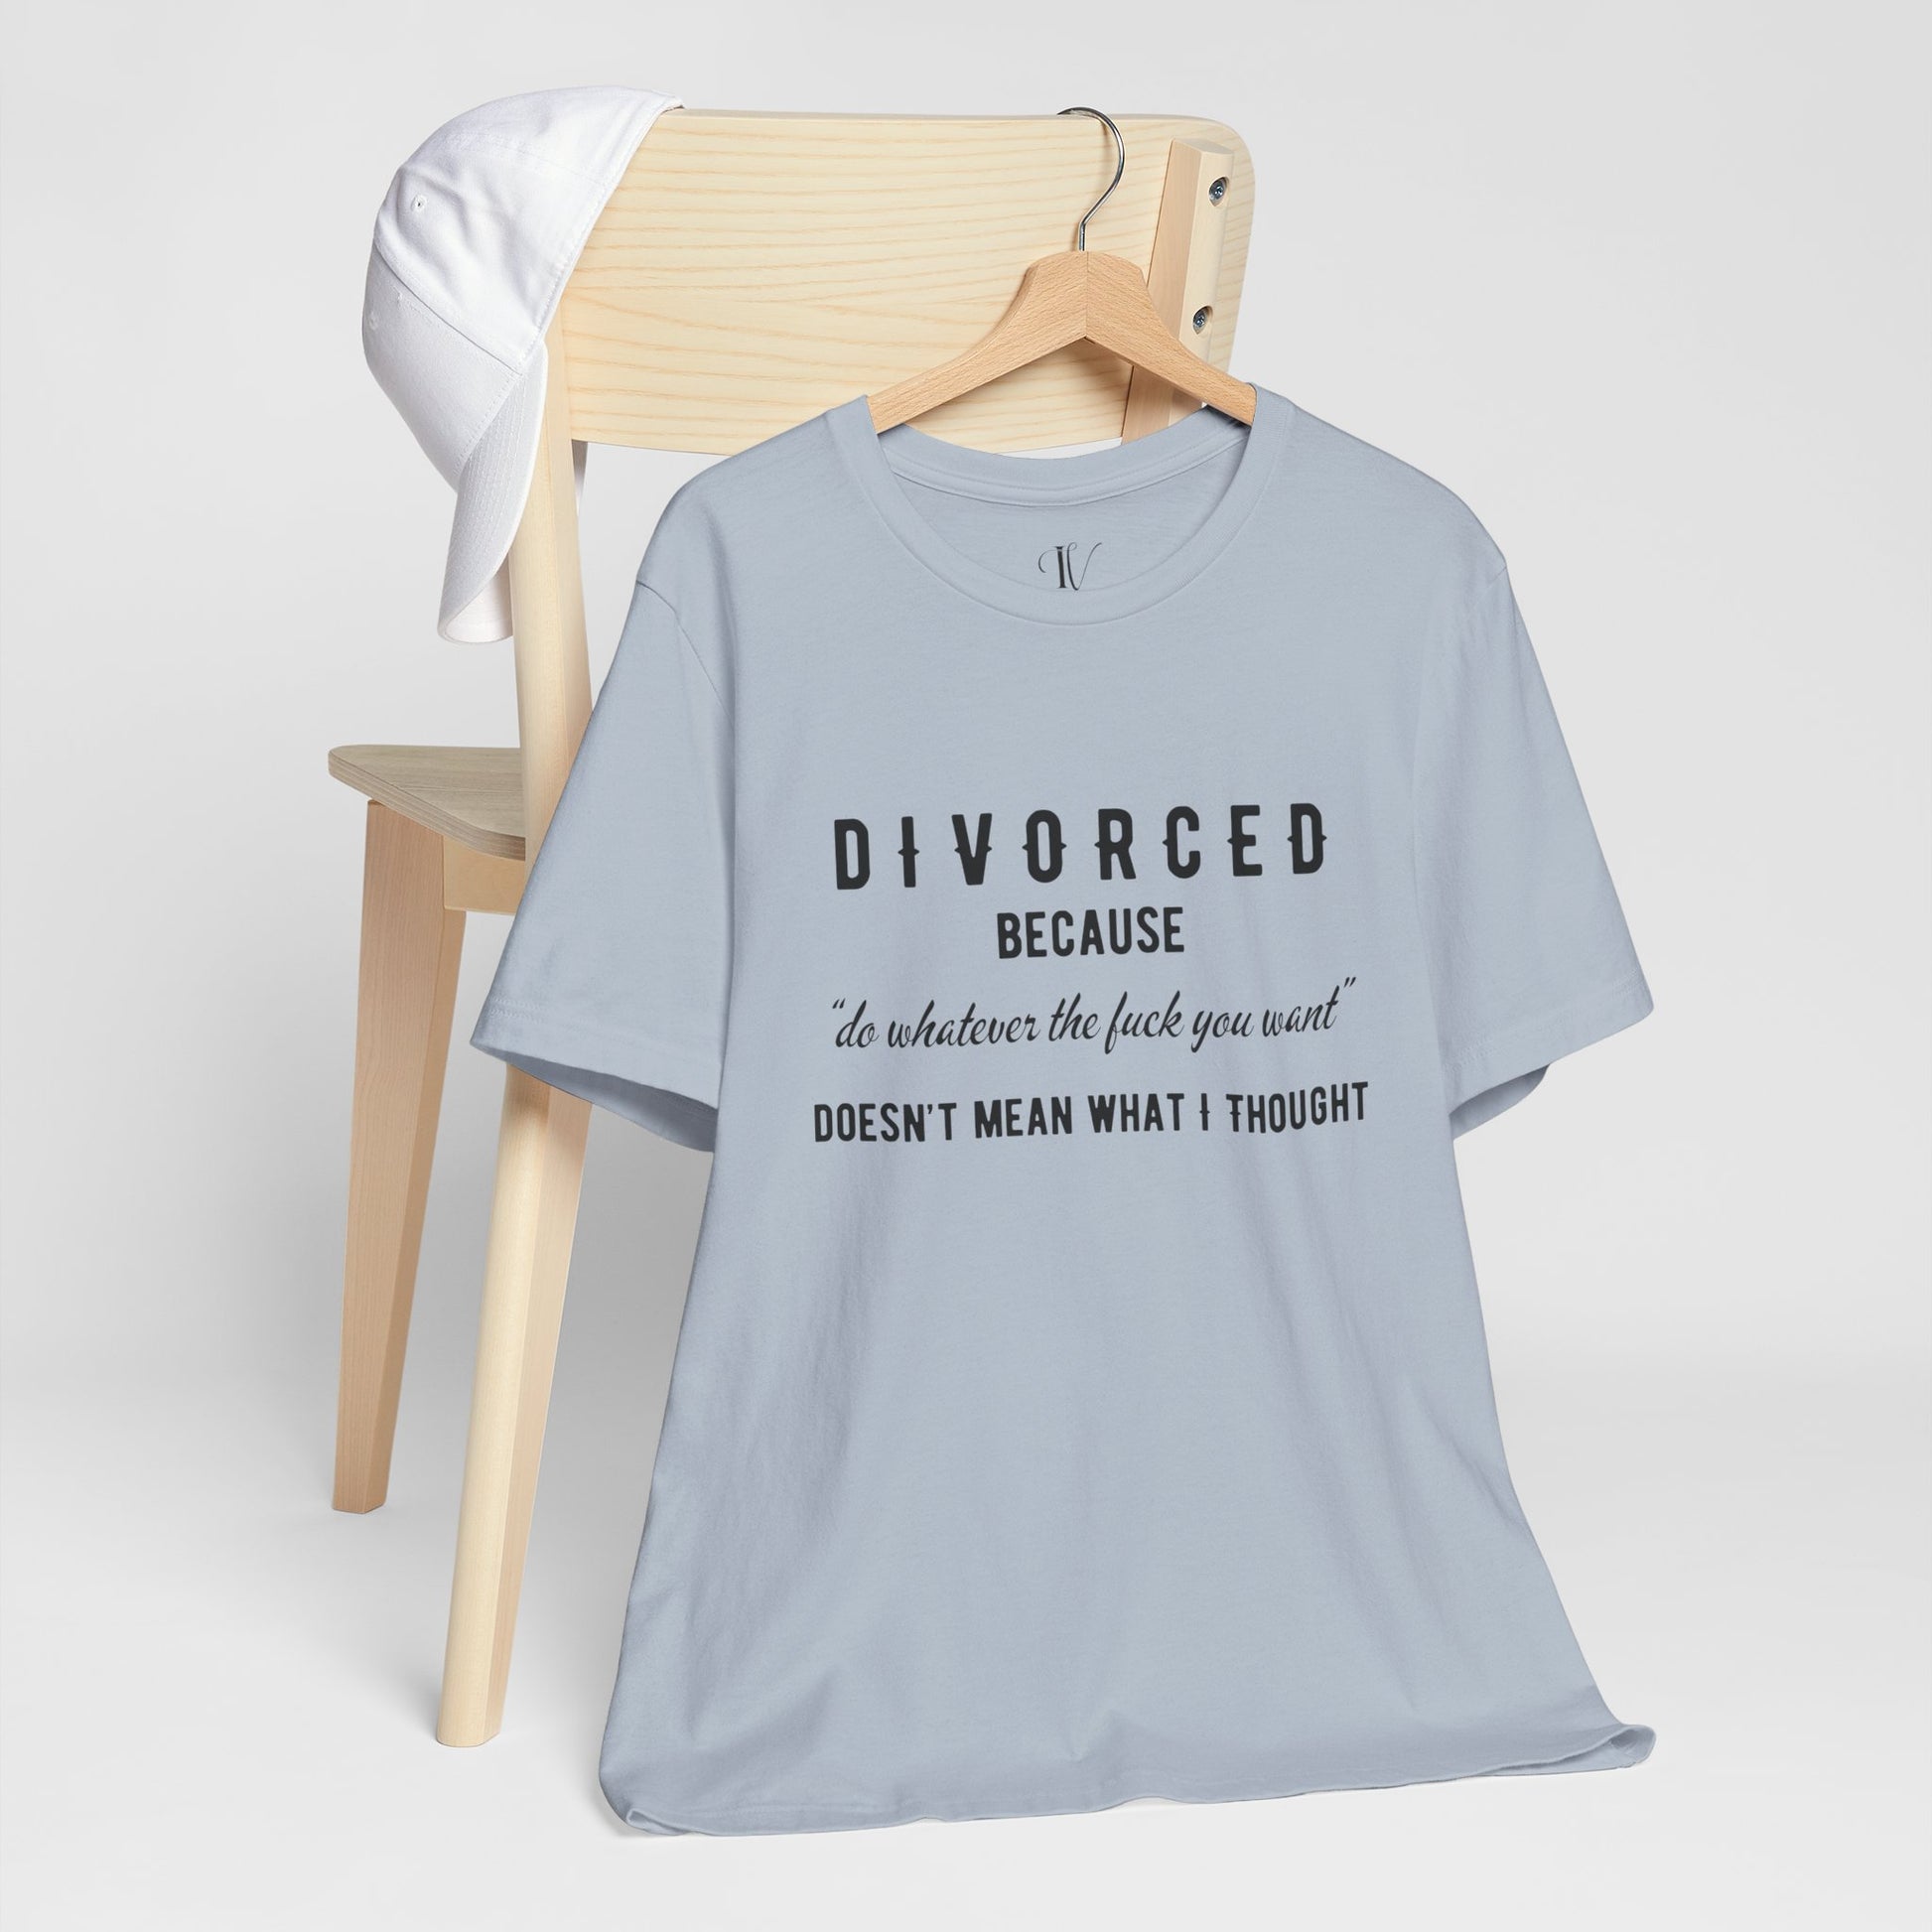 Divorced Shirt - Funny Divorce Party Gift for Ex-Husband or Ex-Wife T-Shirt Light Blue XS 